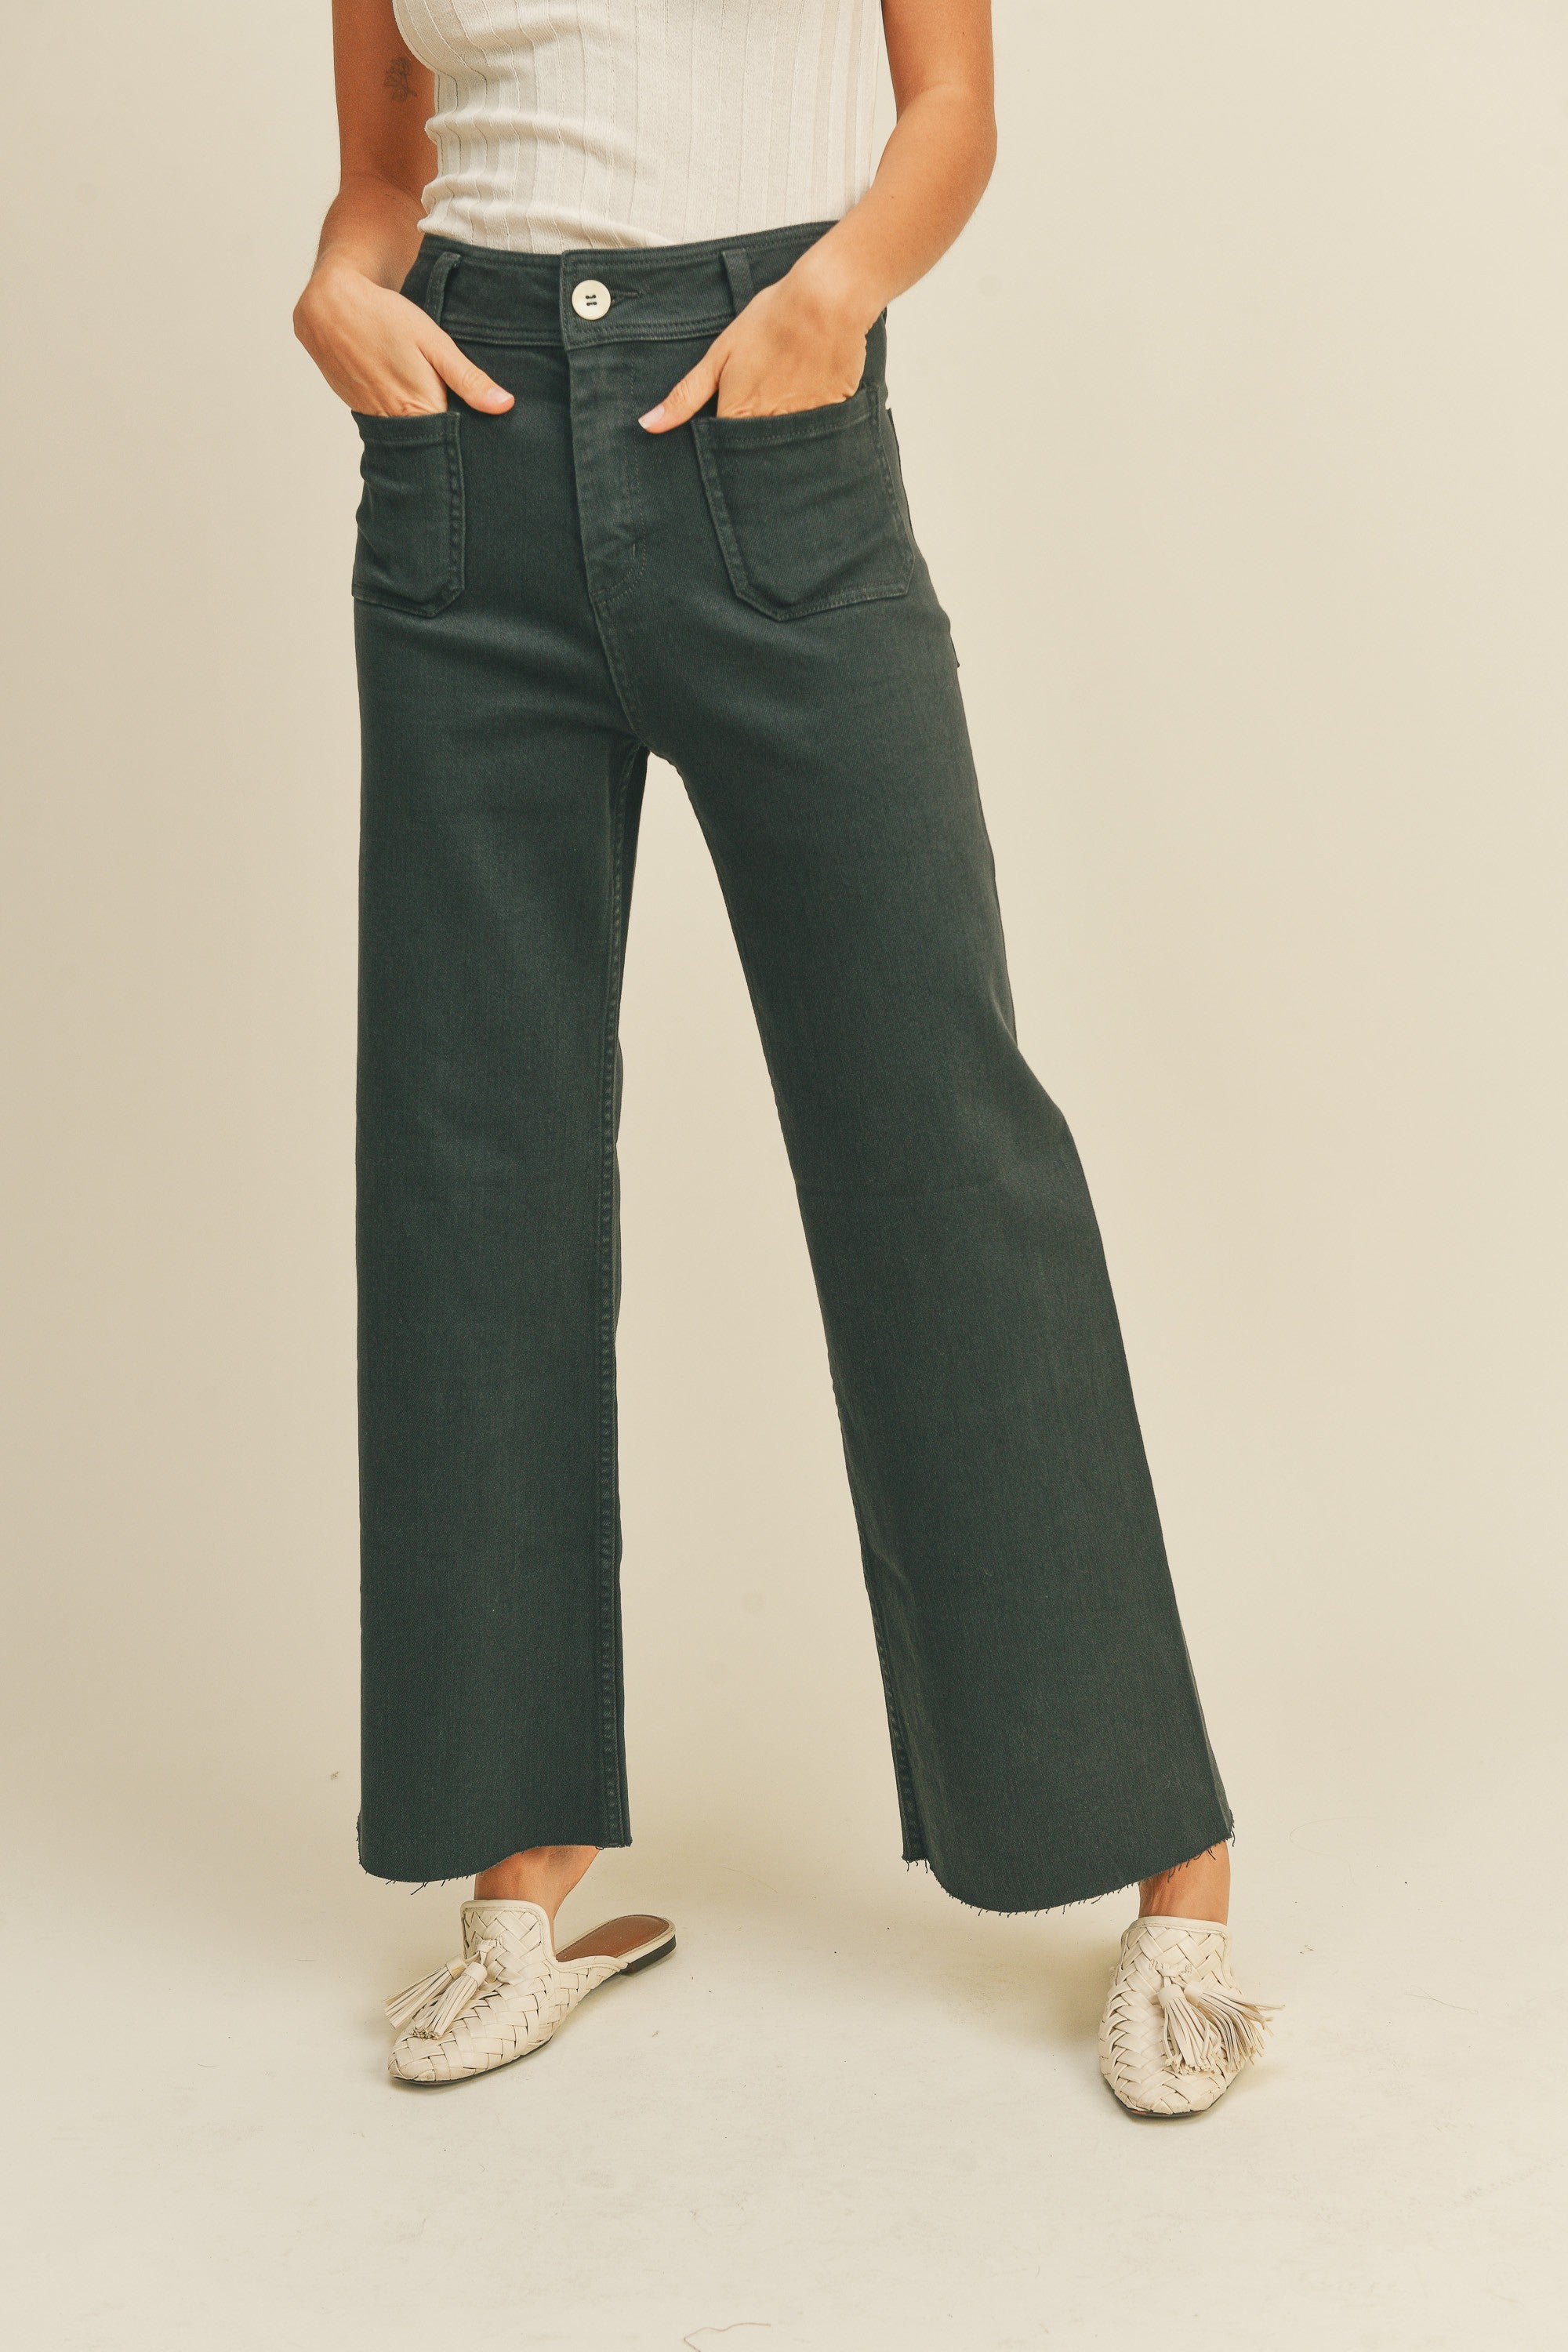 Straight Wide Leg Pants - Front Pockets